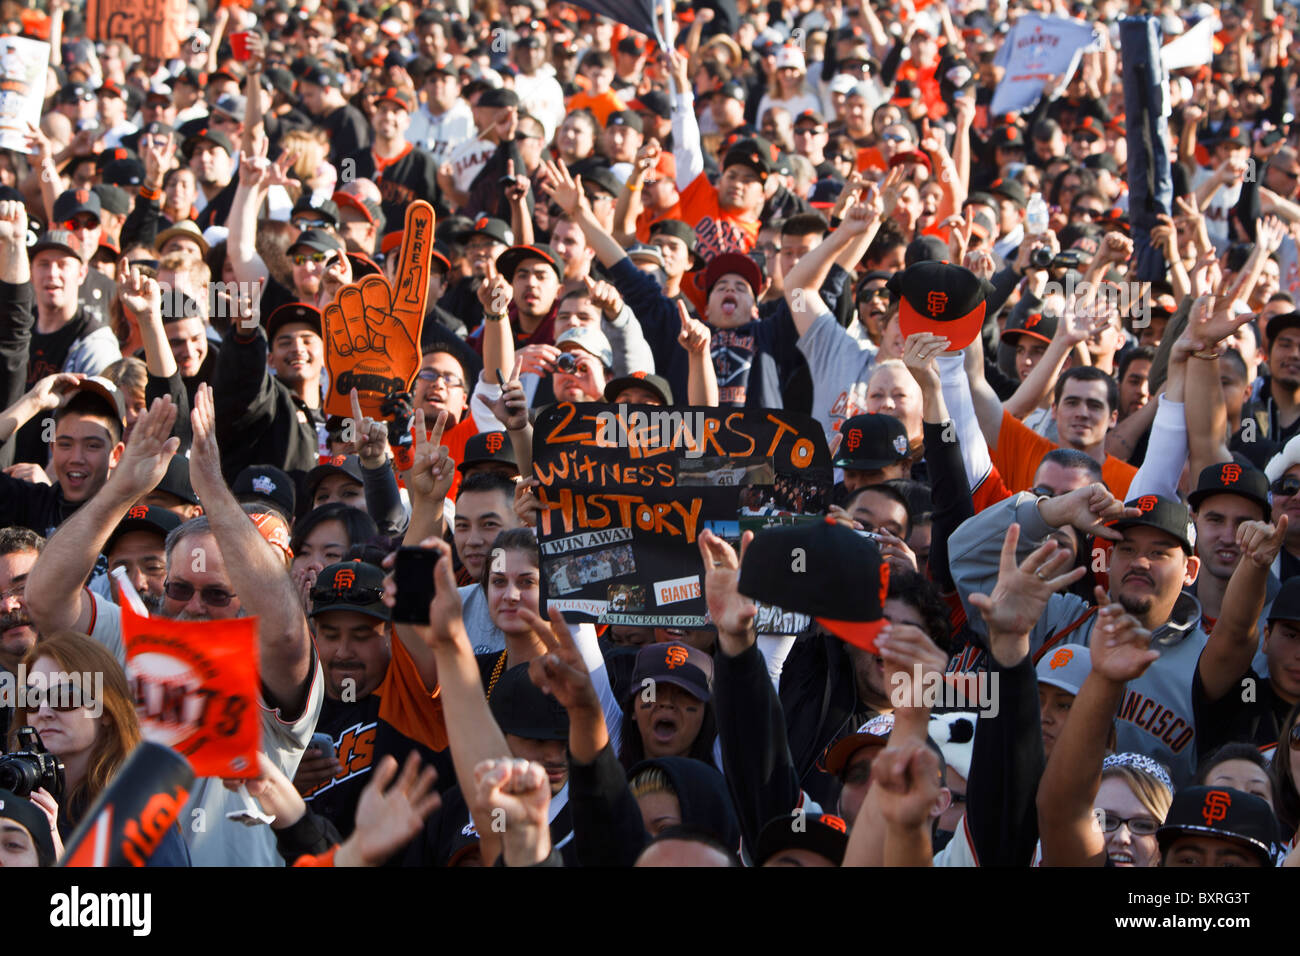 News Pix: Giants Win the World Series, Fans Celebrate, and A Parade